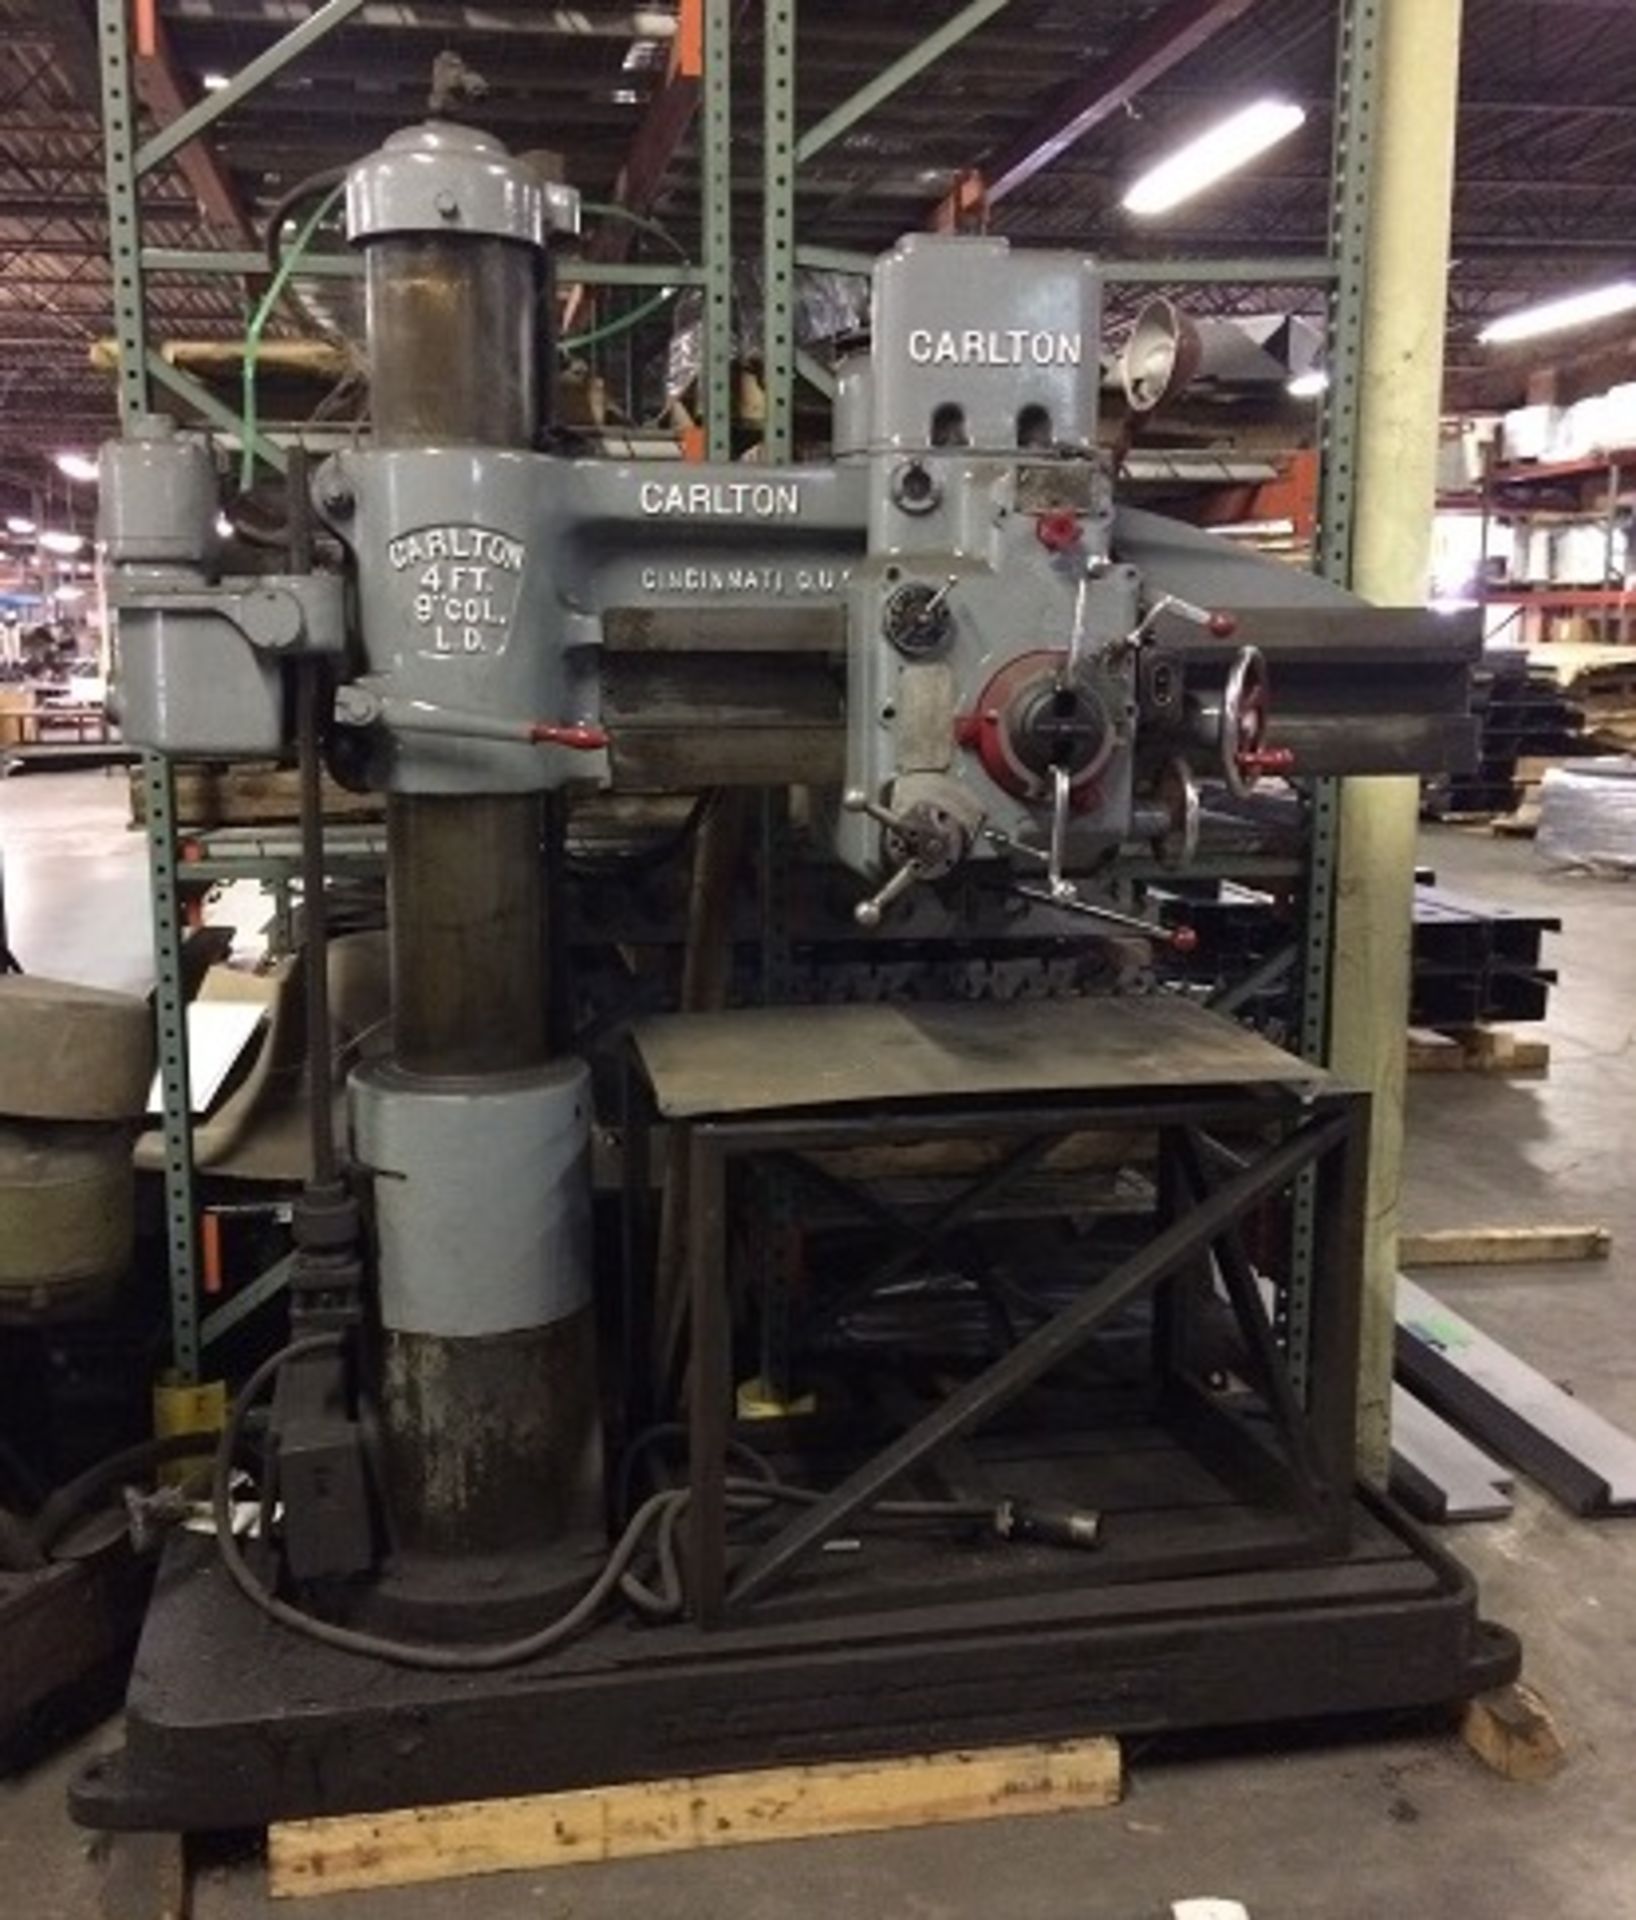 Carlton 4 Ft. X 9 In. Radial Arm Drill, No Loading Fee, Location, Florence, Kentucky